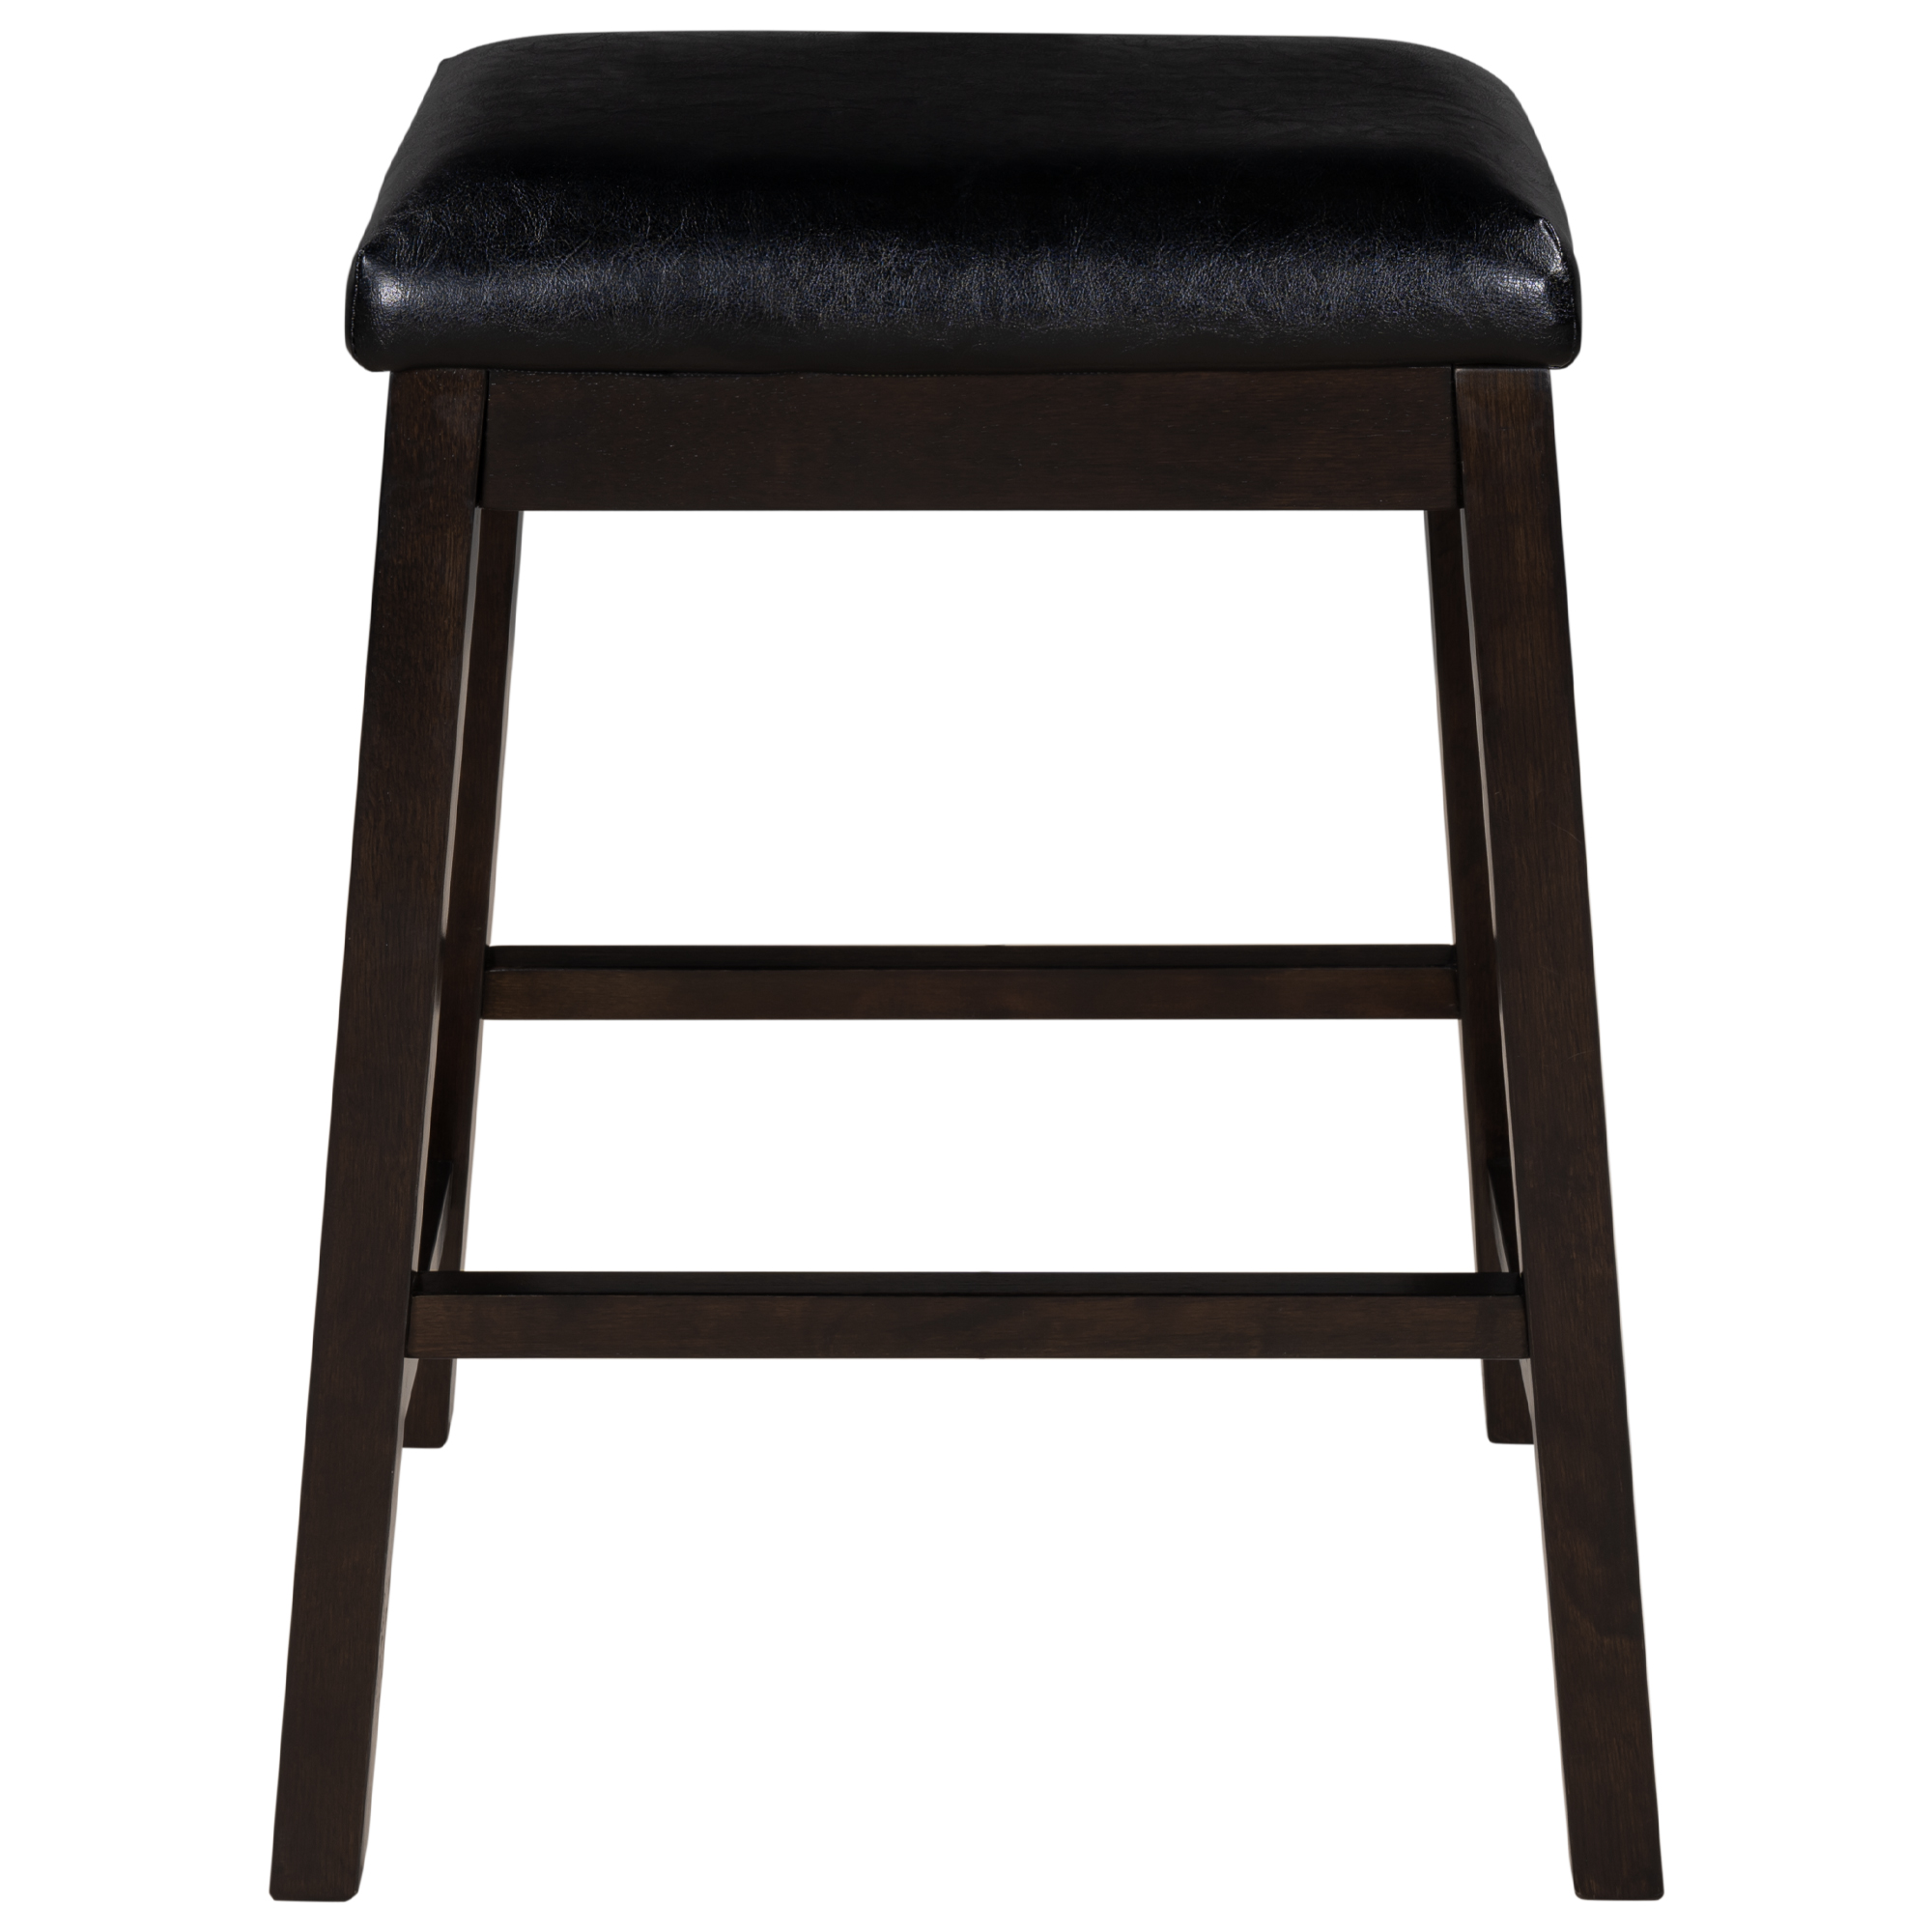 4 Pieces Counter Height Wood Kitchen Dining Upholstered Stools for Small Places, Brown Finish+ Black Cushion-Boyel Living